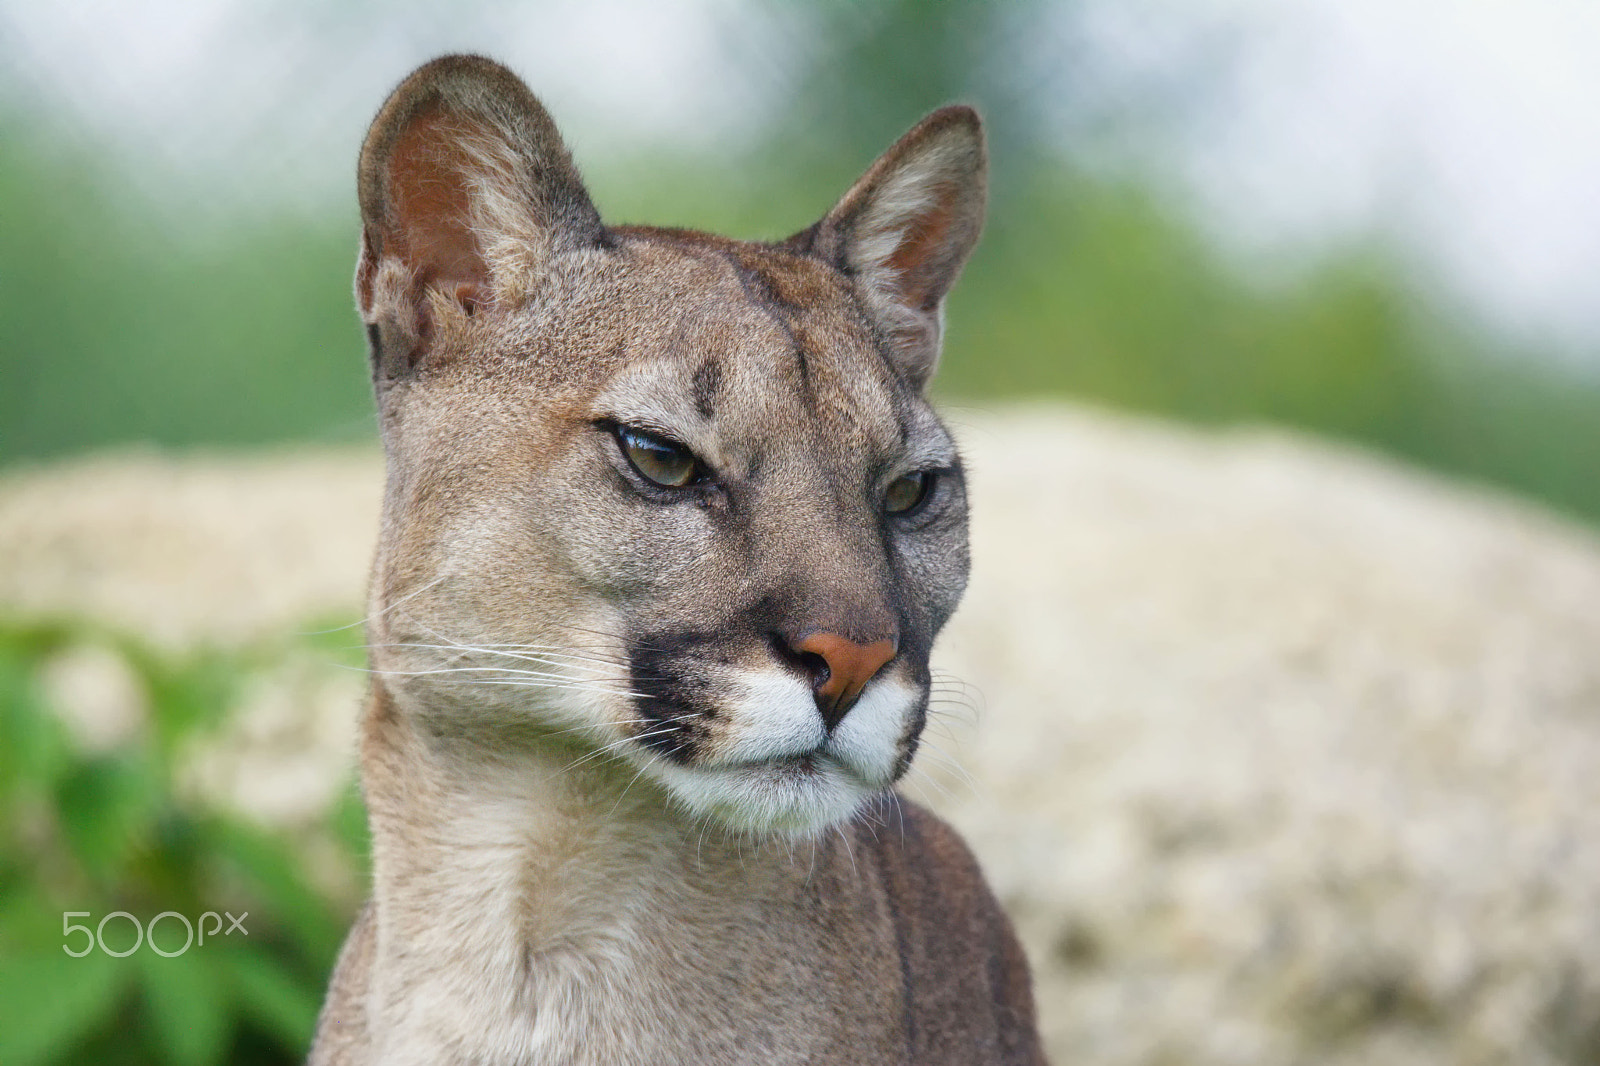 150.00 - 600.00 mm f/5.0 - 6.3 sample photo. American cougar photography